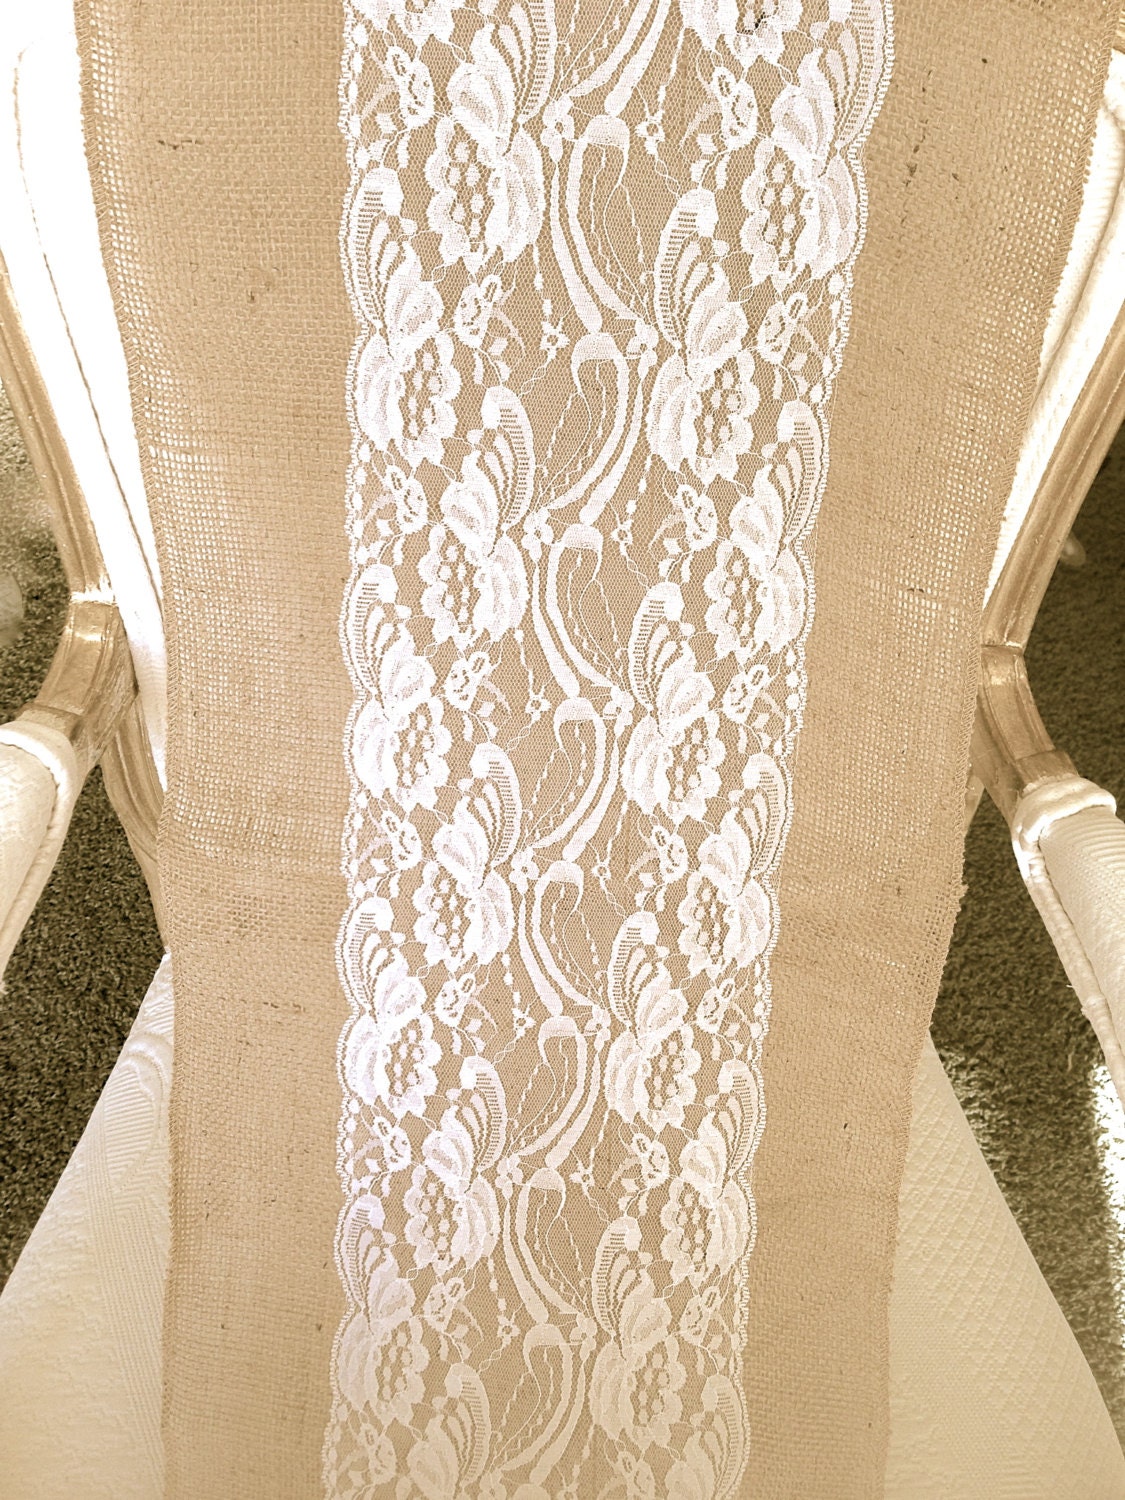 Vintage, White Lace Runner, Burlap Table Runner, 12"x108". Country, Shabby Chic, Vintage, or Rustic Wedding